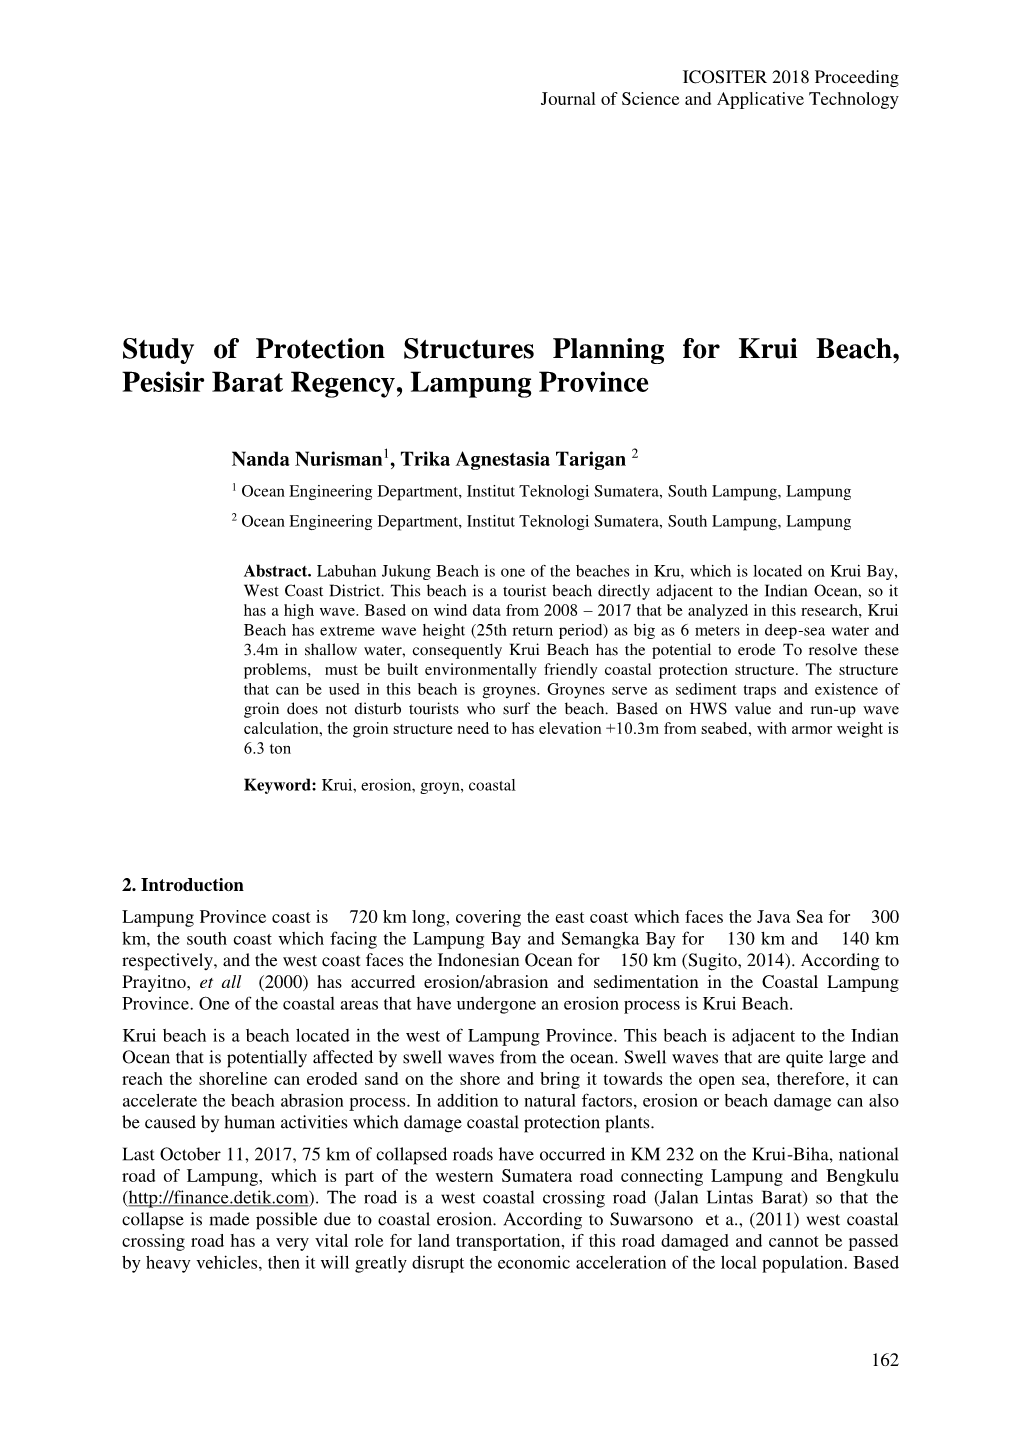 Study of Protection Structures Planning for Krui Beach, Pesisir Barat Regency, Lampung Province